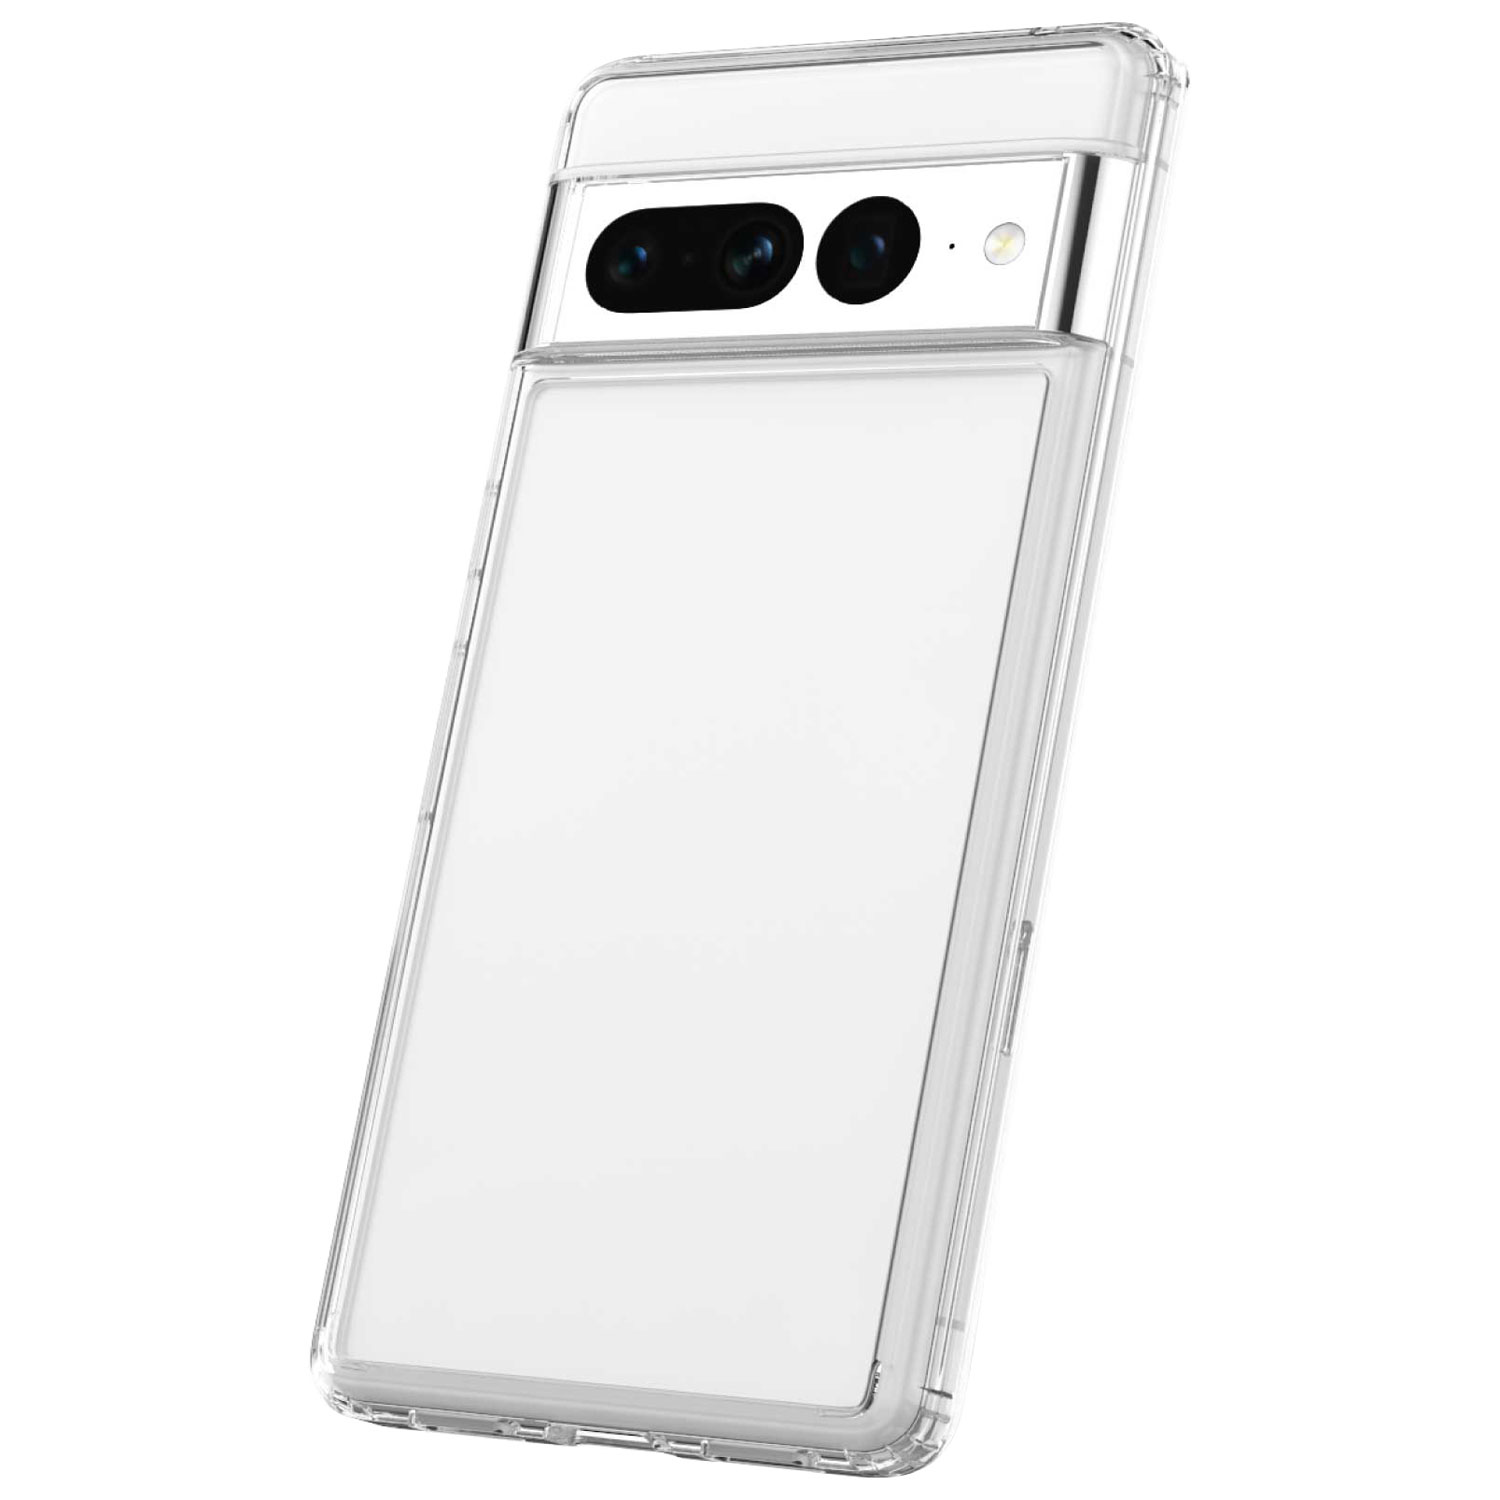 TUFF8 Fitted Hard Shell Case for Google Pixel 7 Pro - Clear